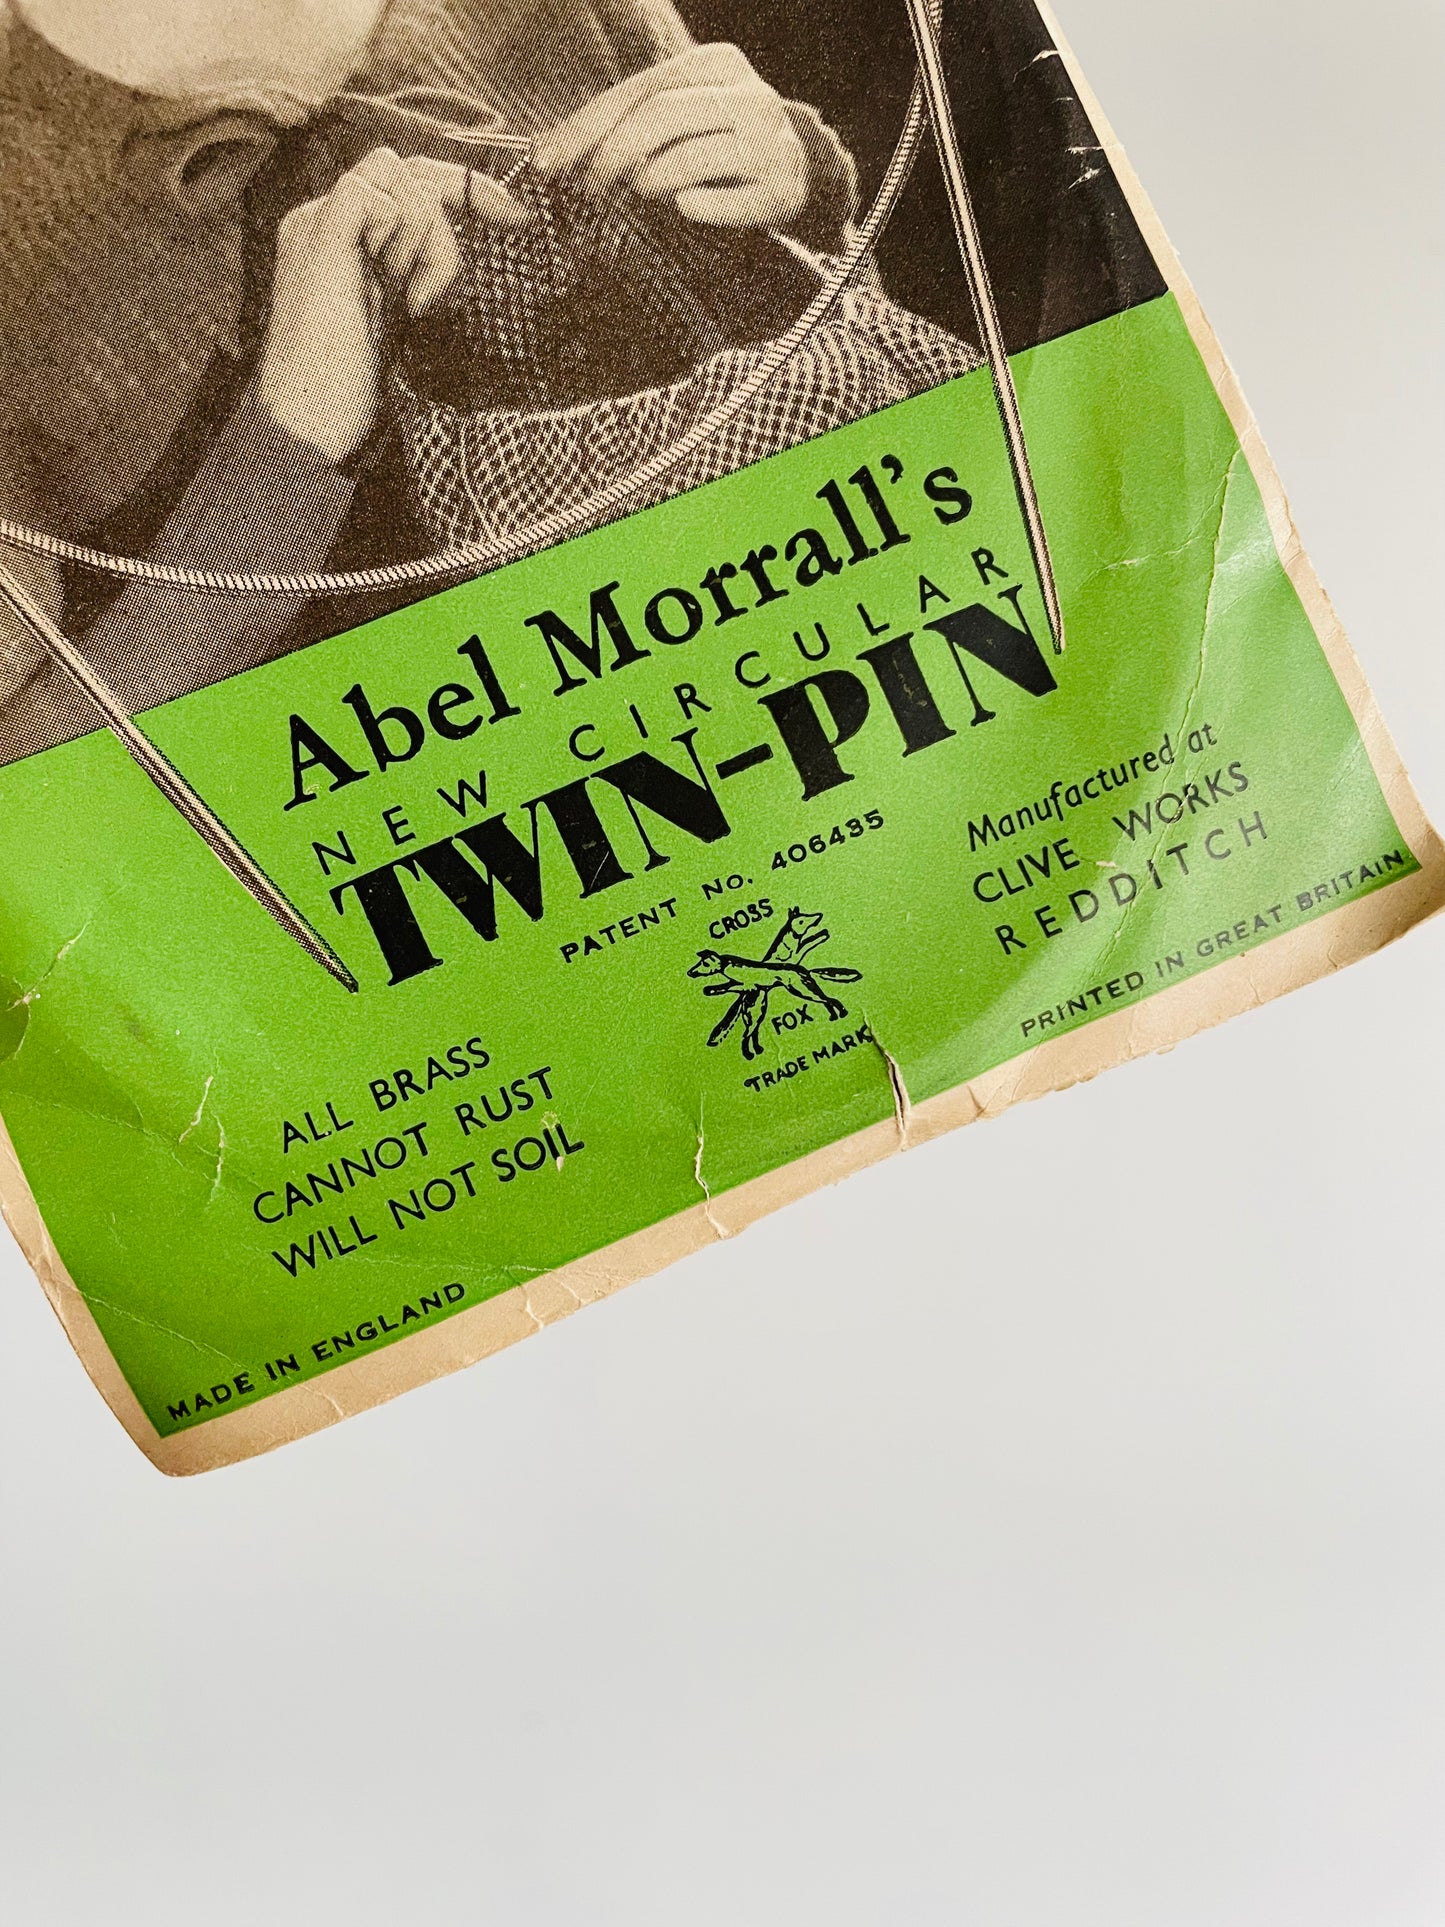 Abel Morrall's New Circular Twin-Pin for Knitting - American Size 5 - Clive Works Redditch Made in England